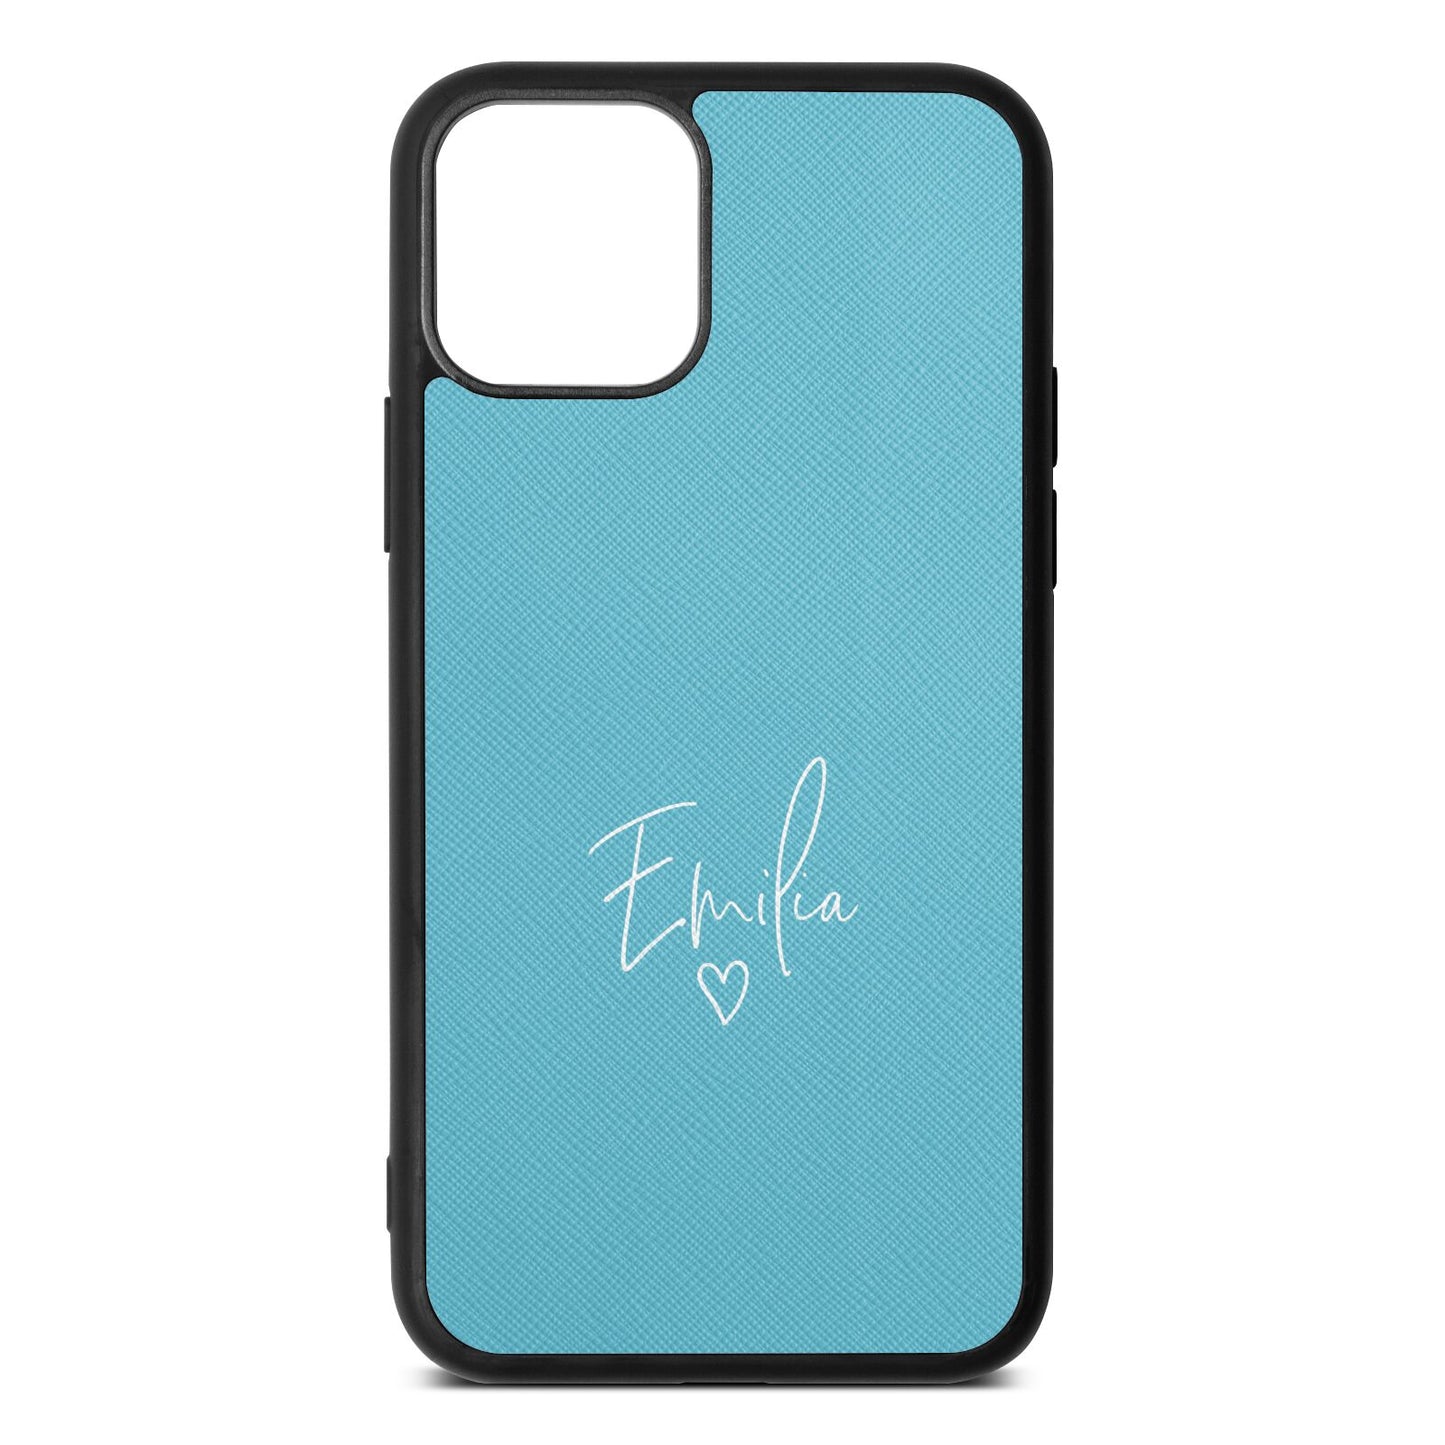 White Handwritten Name Transparent Sky Saffiano Leather iPhone 11 Pro Case